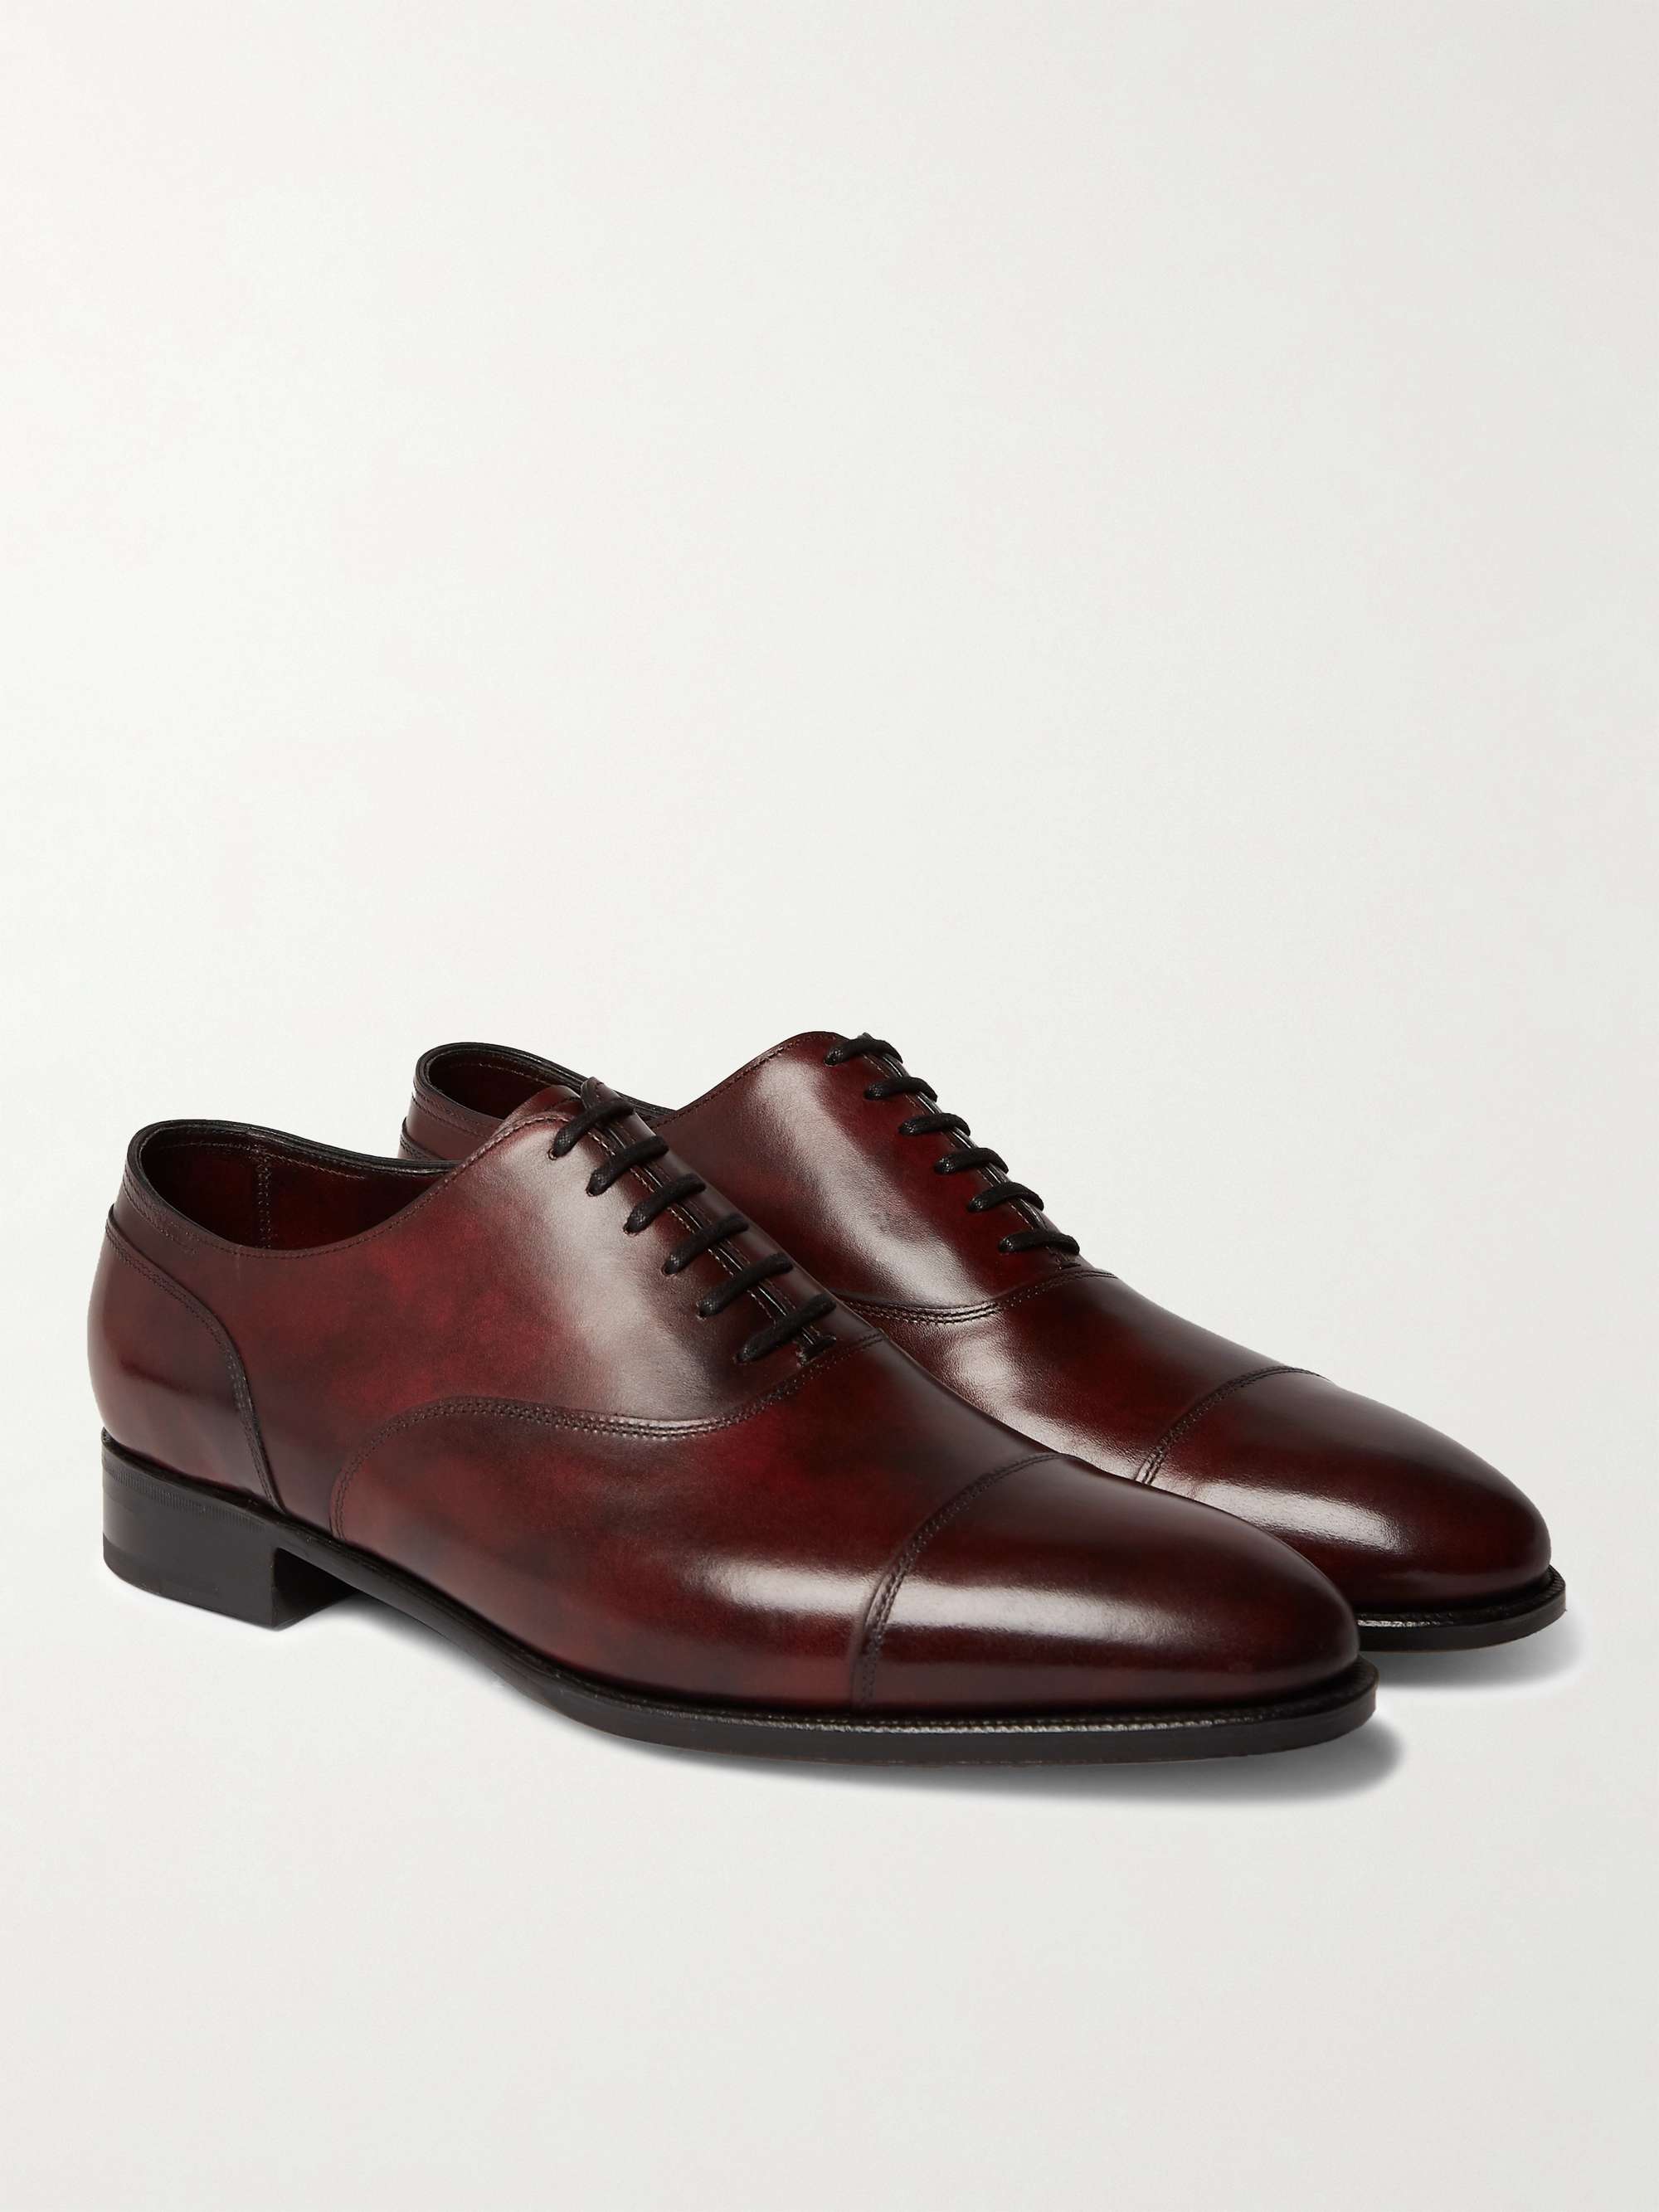 JOHN LOBB Alford Museum Burnished-Leather Cap-Toe Oxford Shoes